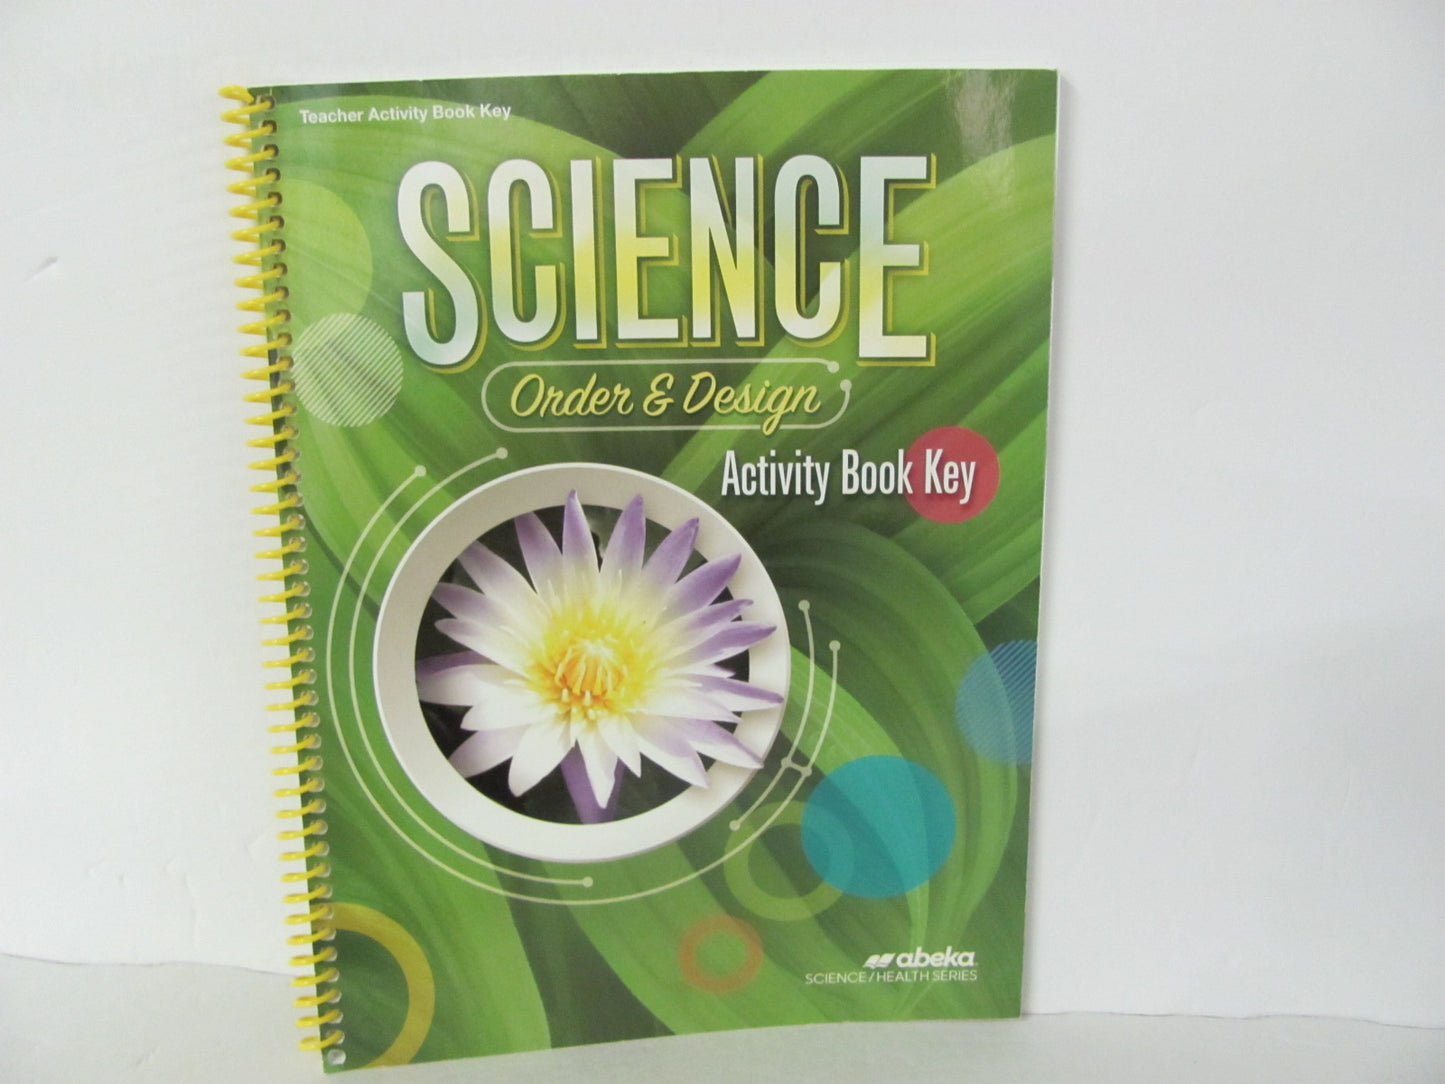 Order & Design Abeka Activity Key Pre-Owned 7th Grade Science Textbooks